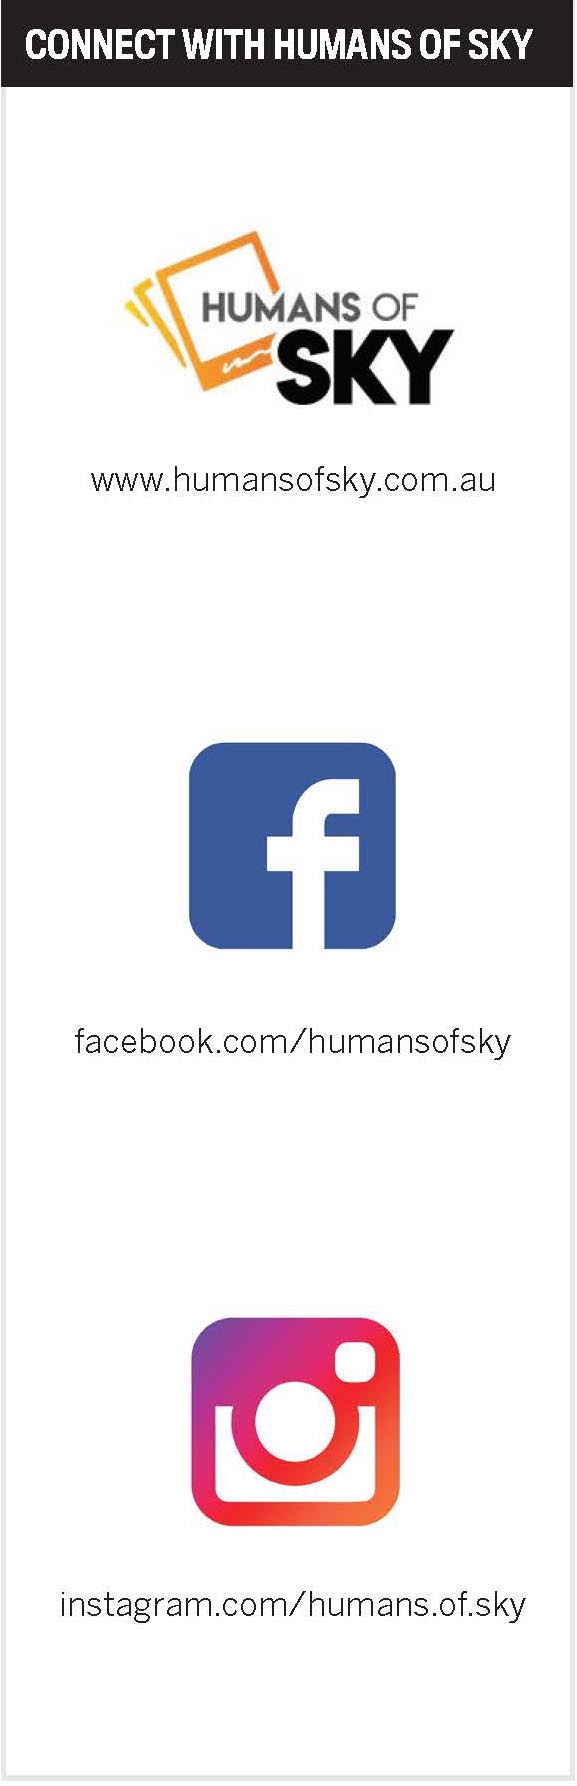 Connect with humans of SKY